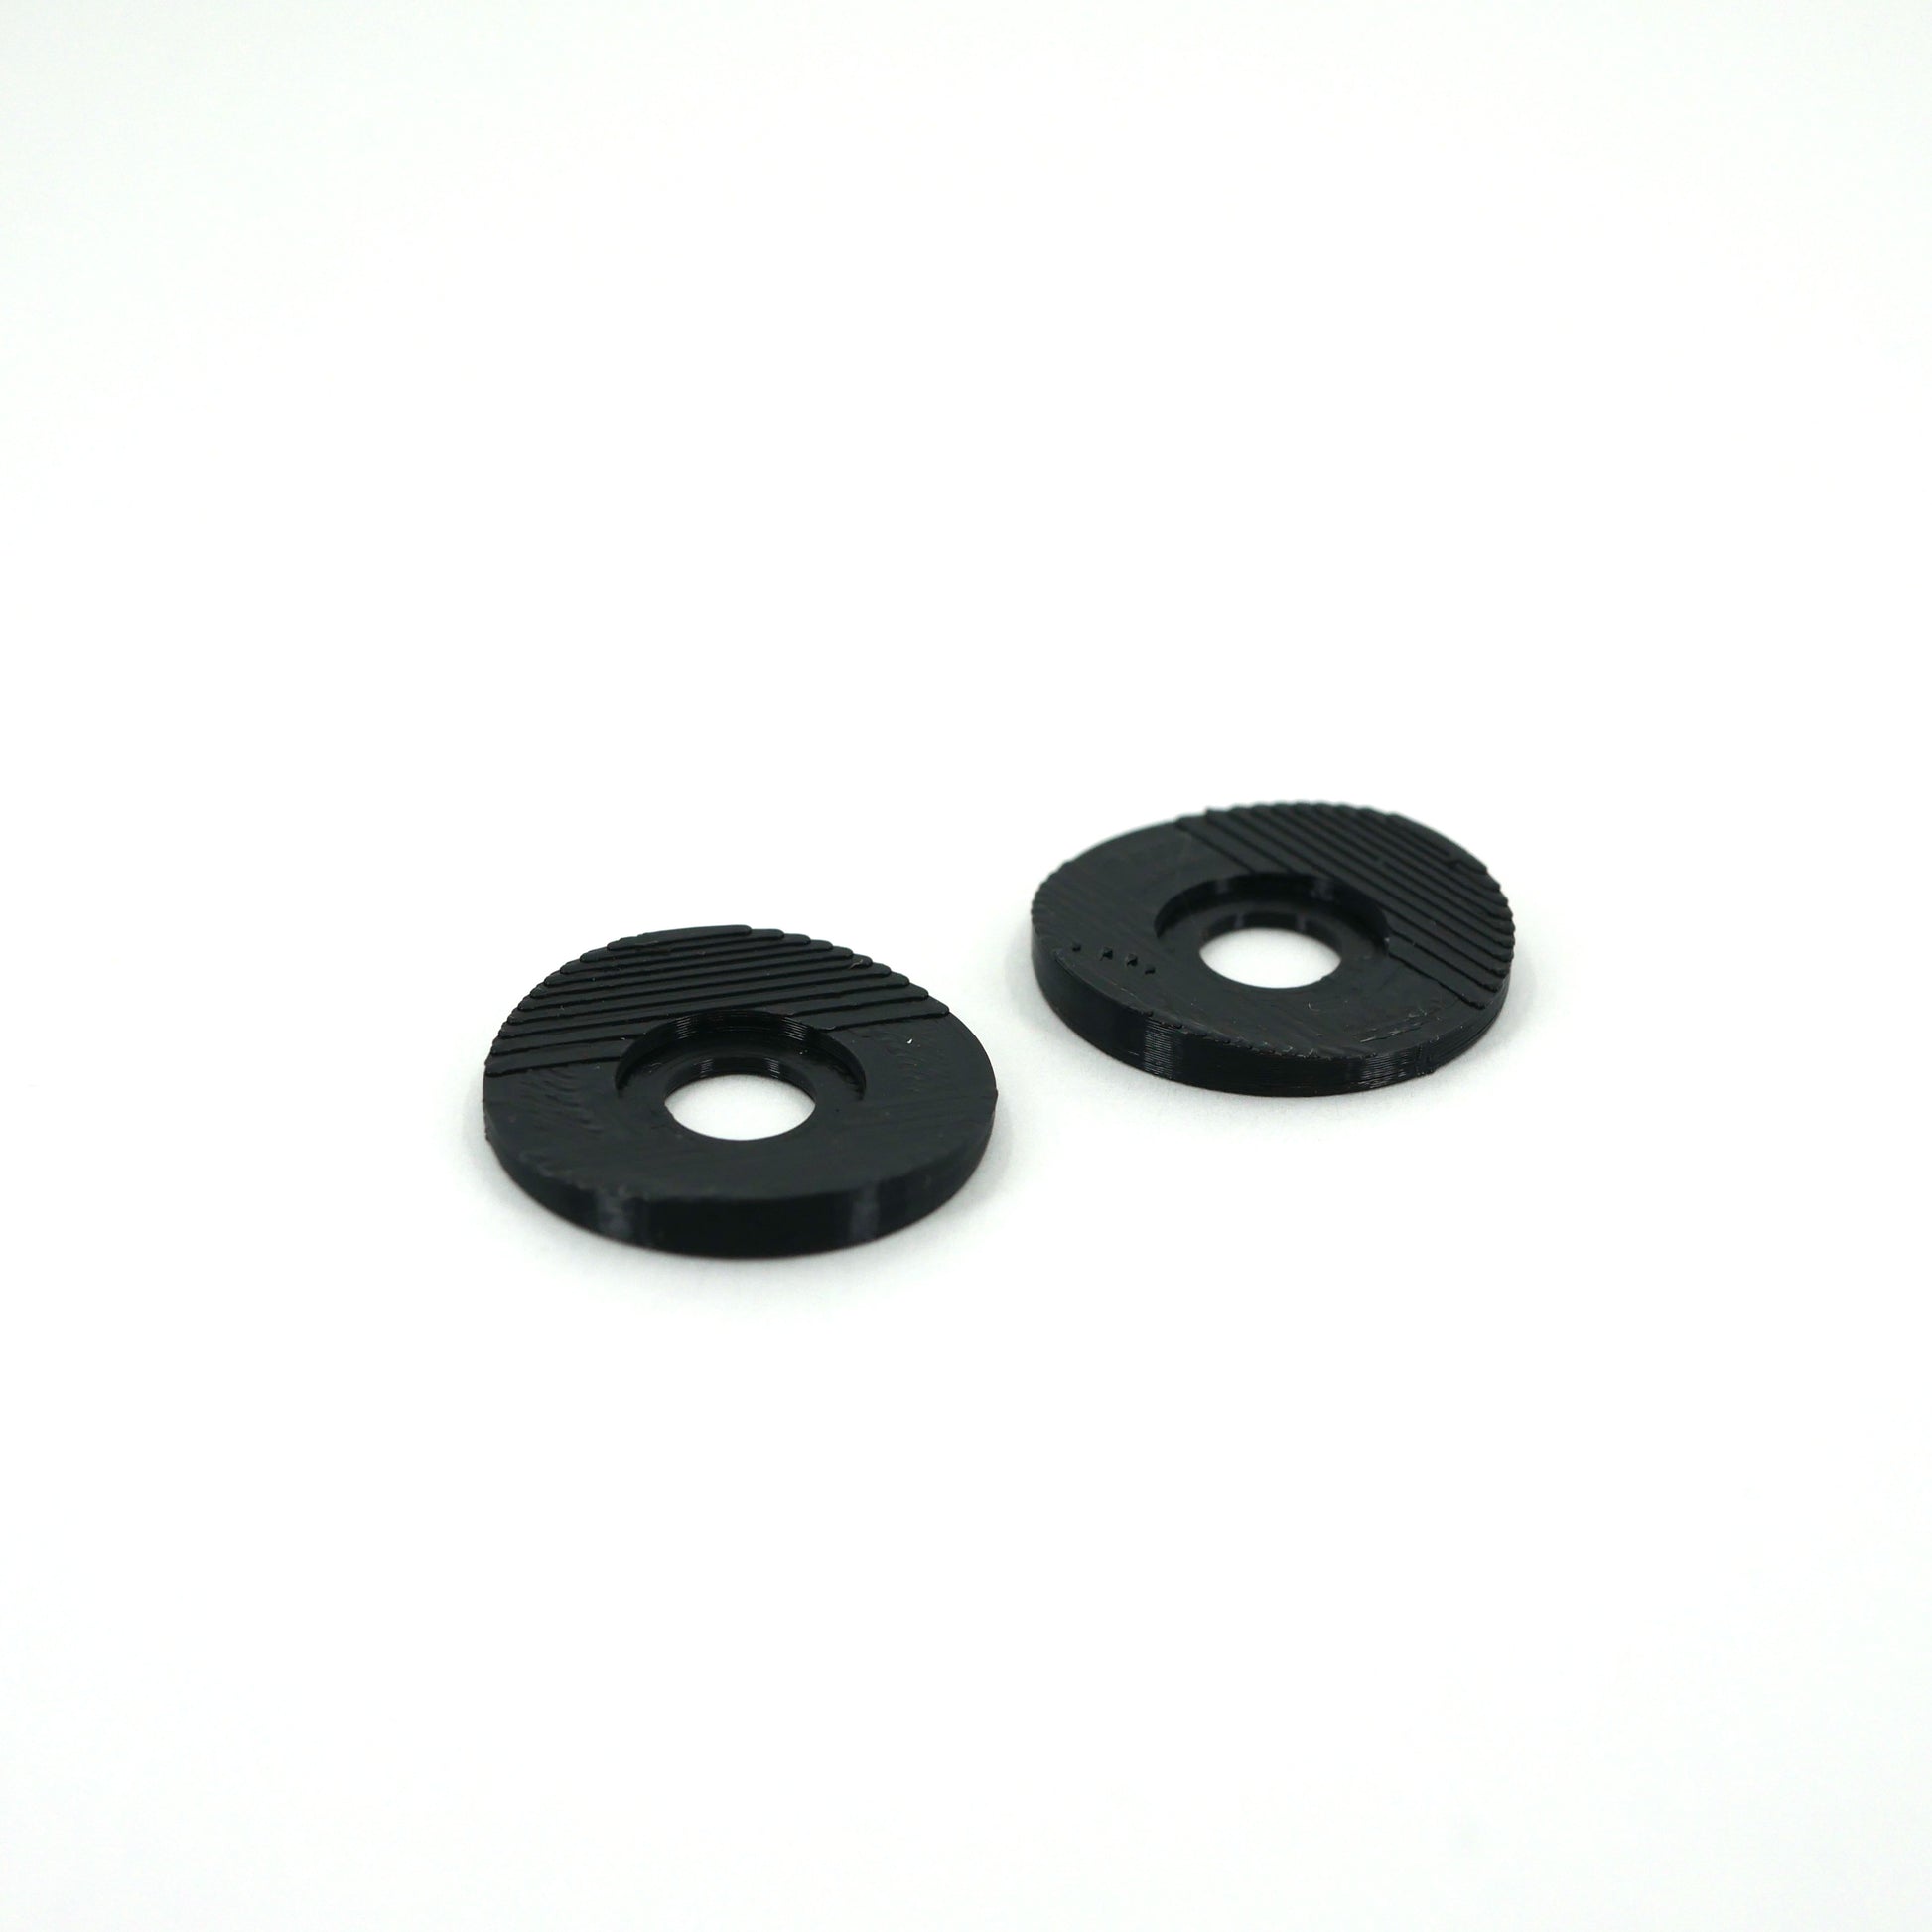 Two black microphone washers for the Blue Yeti microphone.